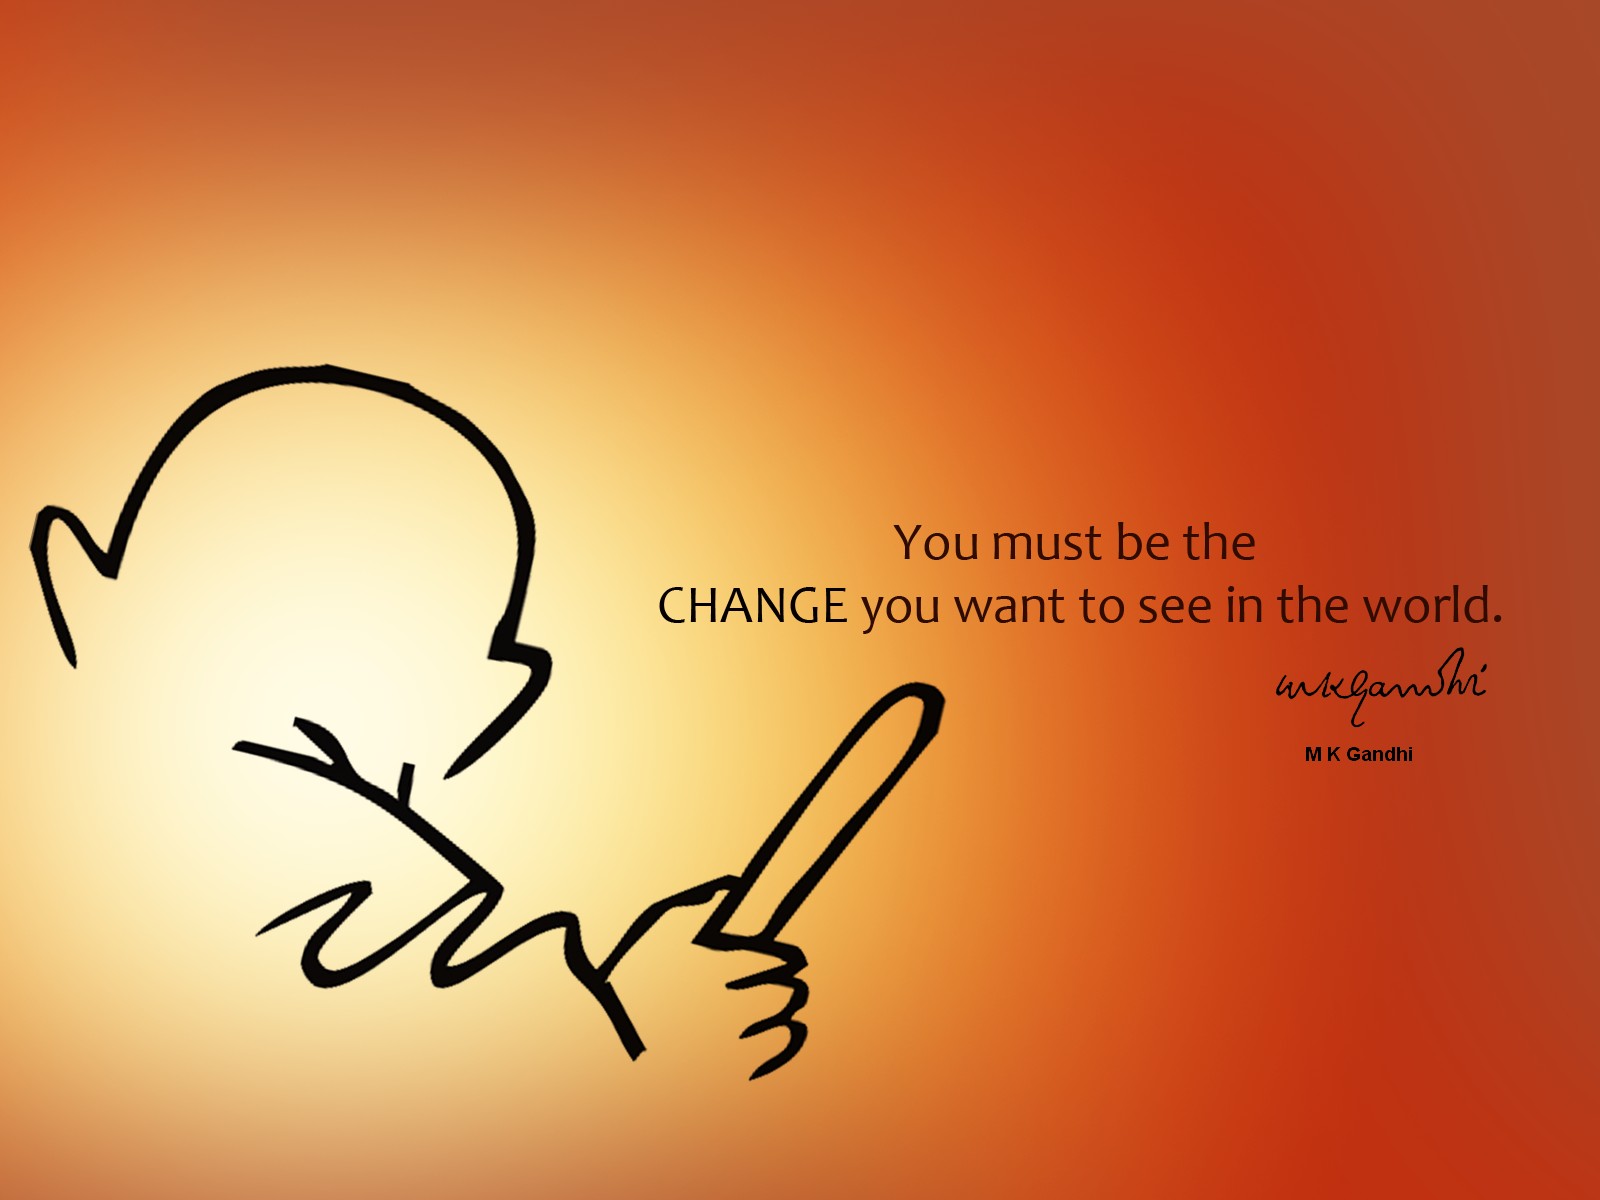 Mahatma Gandhi Wallpaper: You must be the Change you want to see